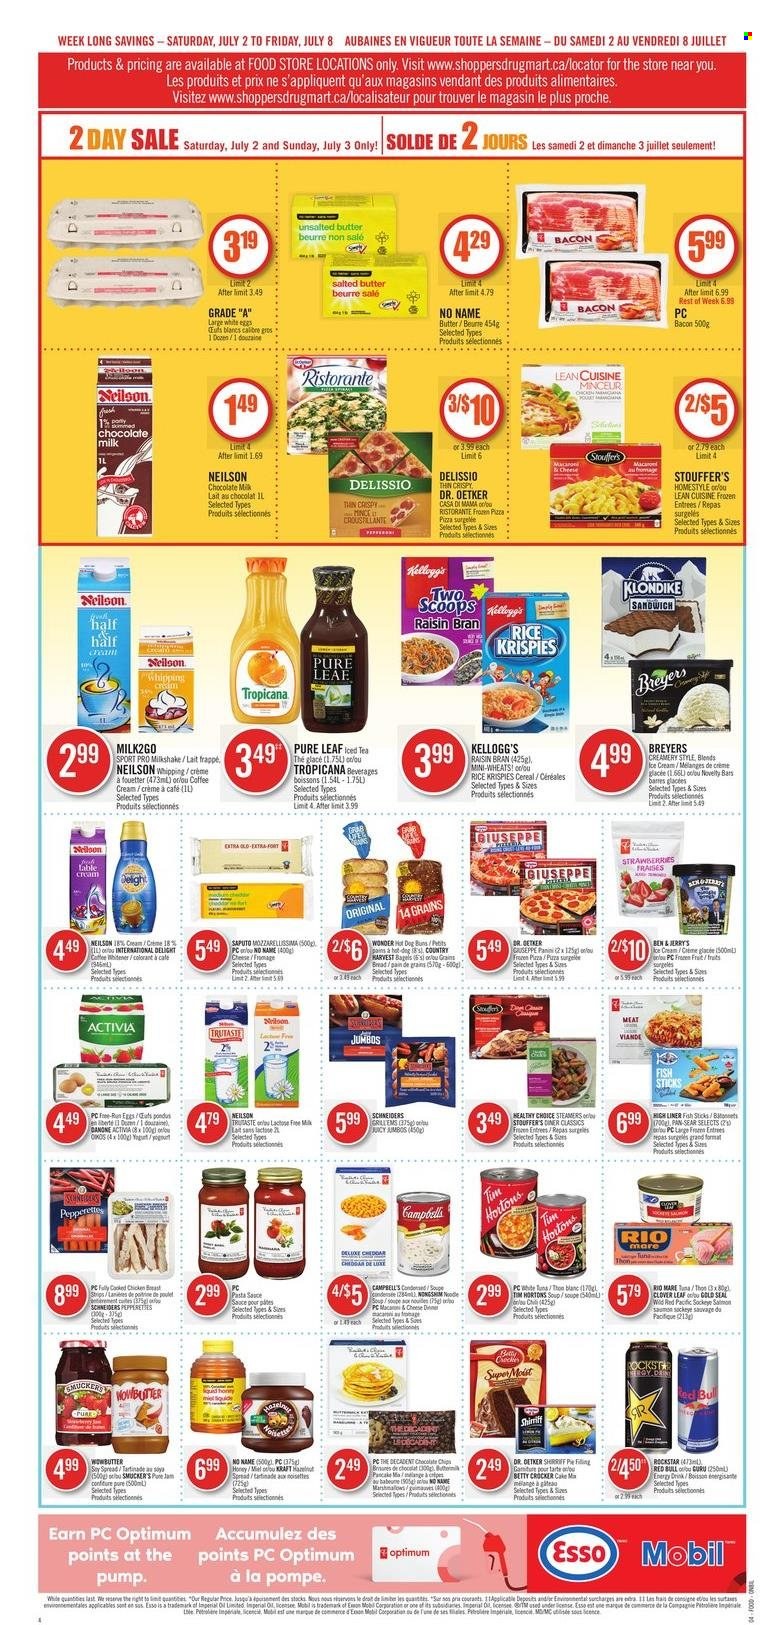 thumbnail - Shoppers Drug Mart Flyer - July 02, 2022 - July 08, 2022 - Sales products - bagels, bread, cake, tuna, fish, fish fingers, No Name, fish sticks, Campbell's, hot dog, pizza, pasta sauce, sandwich, soup, sauce, pancakes, noodles cup, noodles, Lean Cuisine, Healthy Choice, Kraft®, bacon, cheddar, Dr. Oetker, yoghurt, Clover, Activia, milkshake, eggs, salted butter, ice cream, Ben & Jerry's, Stouffer's, marshmallows, milk chocolate, chocolate chips, Kellogg's, strawberries, cereals, Rice Krispies, Raisin Bran, honey, energy drink, Red Bull, Rockstar, tea, Pure Leaf, coffee, pan, Optimum, tote. Page 4.